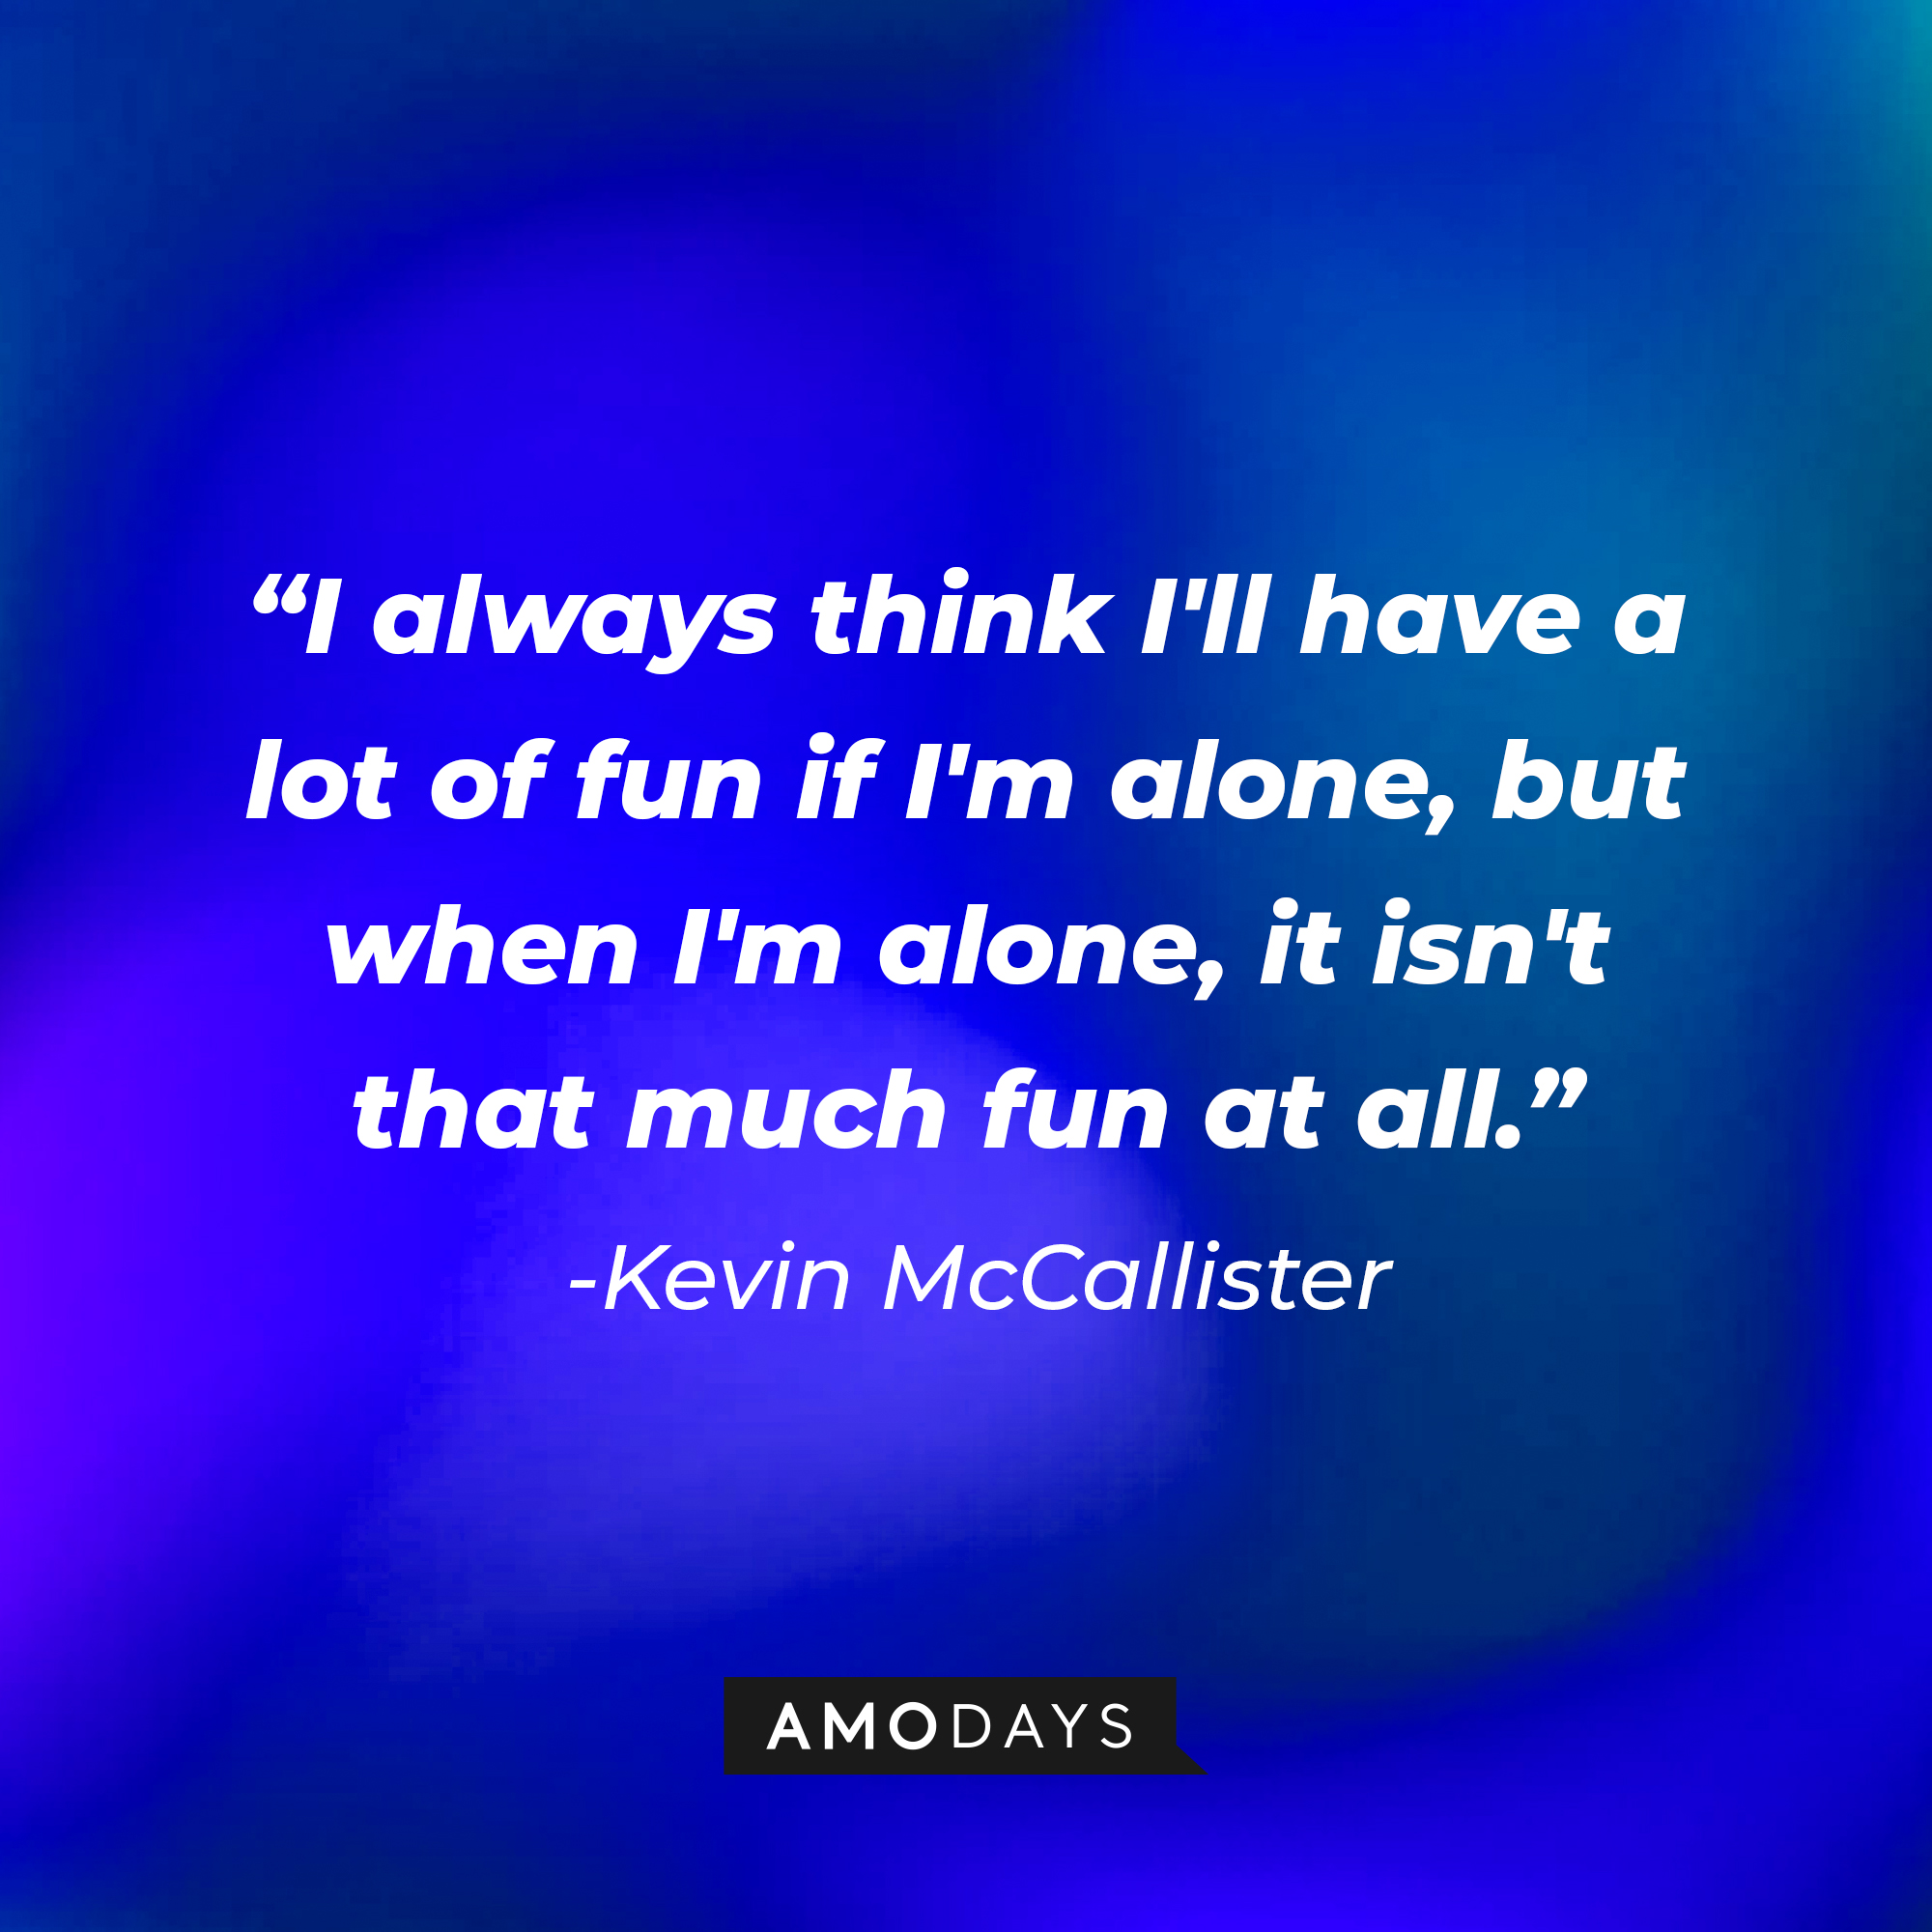 Kevin McCallister's quote: "I always think I'll have a lot of fun if I'm alone, but when I'm alone, it isn't that much fun at all." | Source: AmoDays